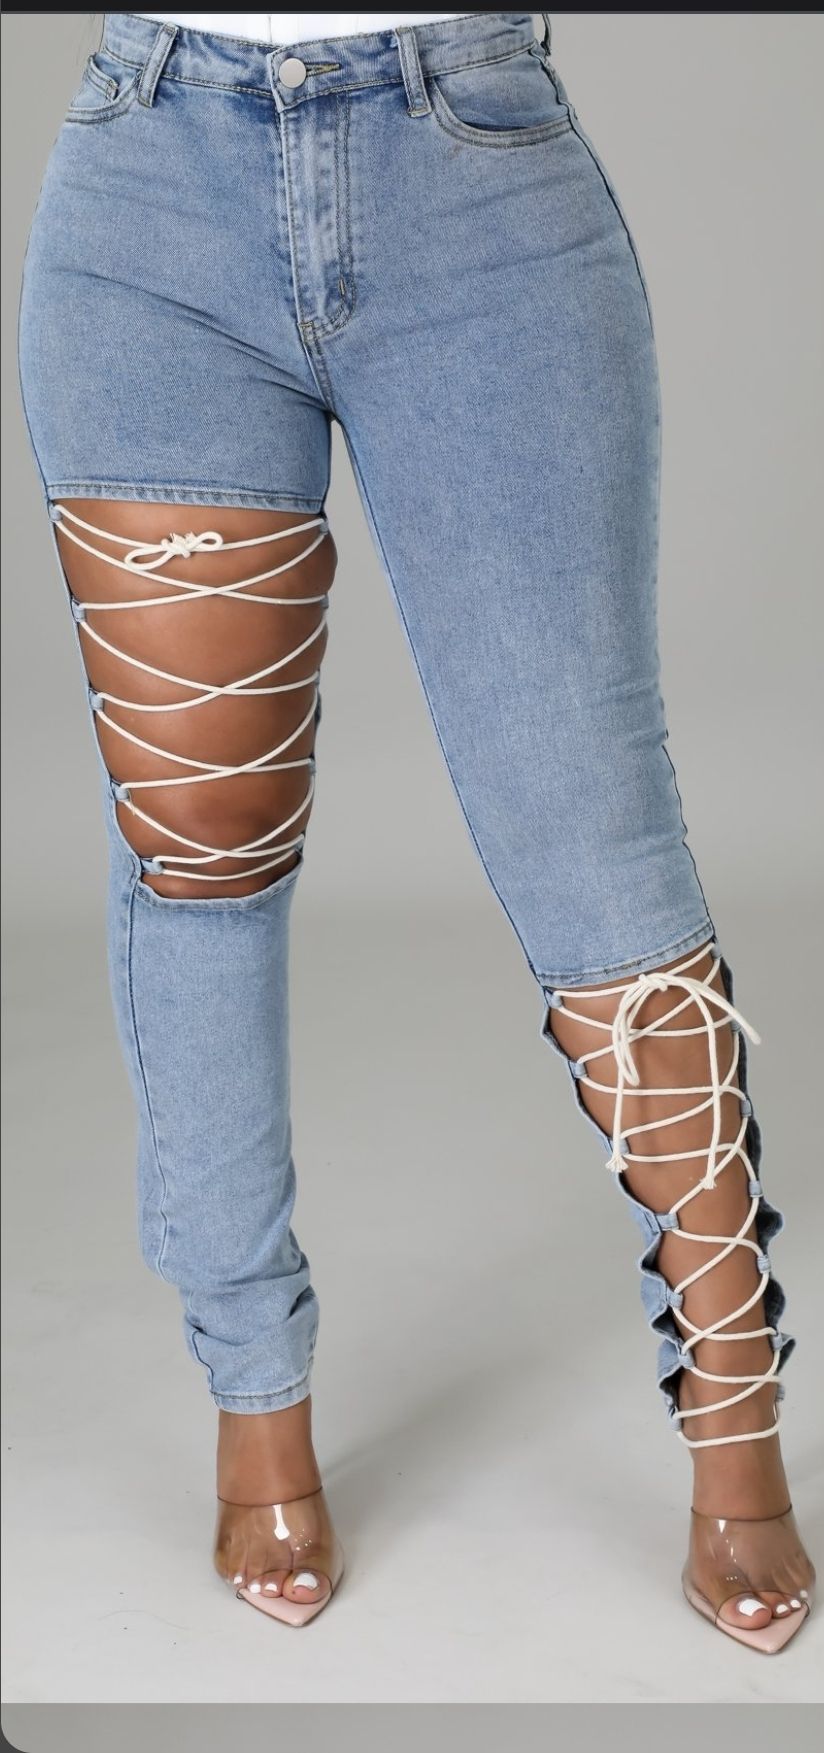 New style elastic lace-up jeans